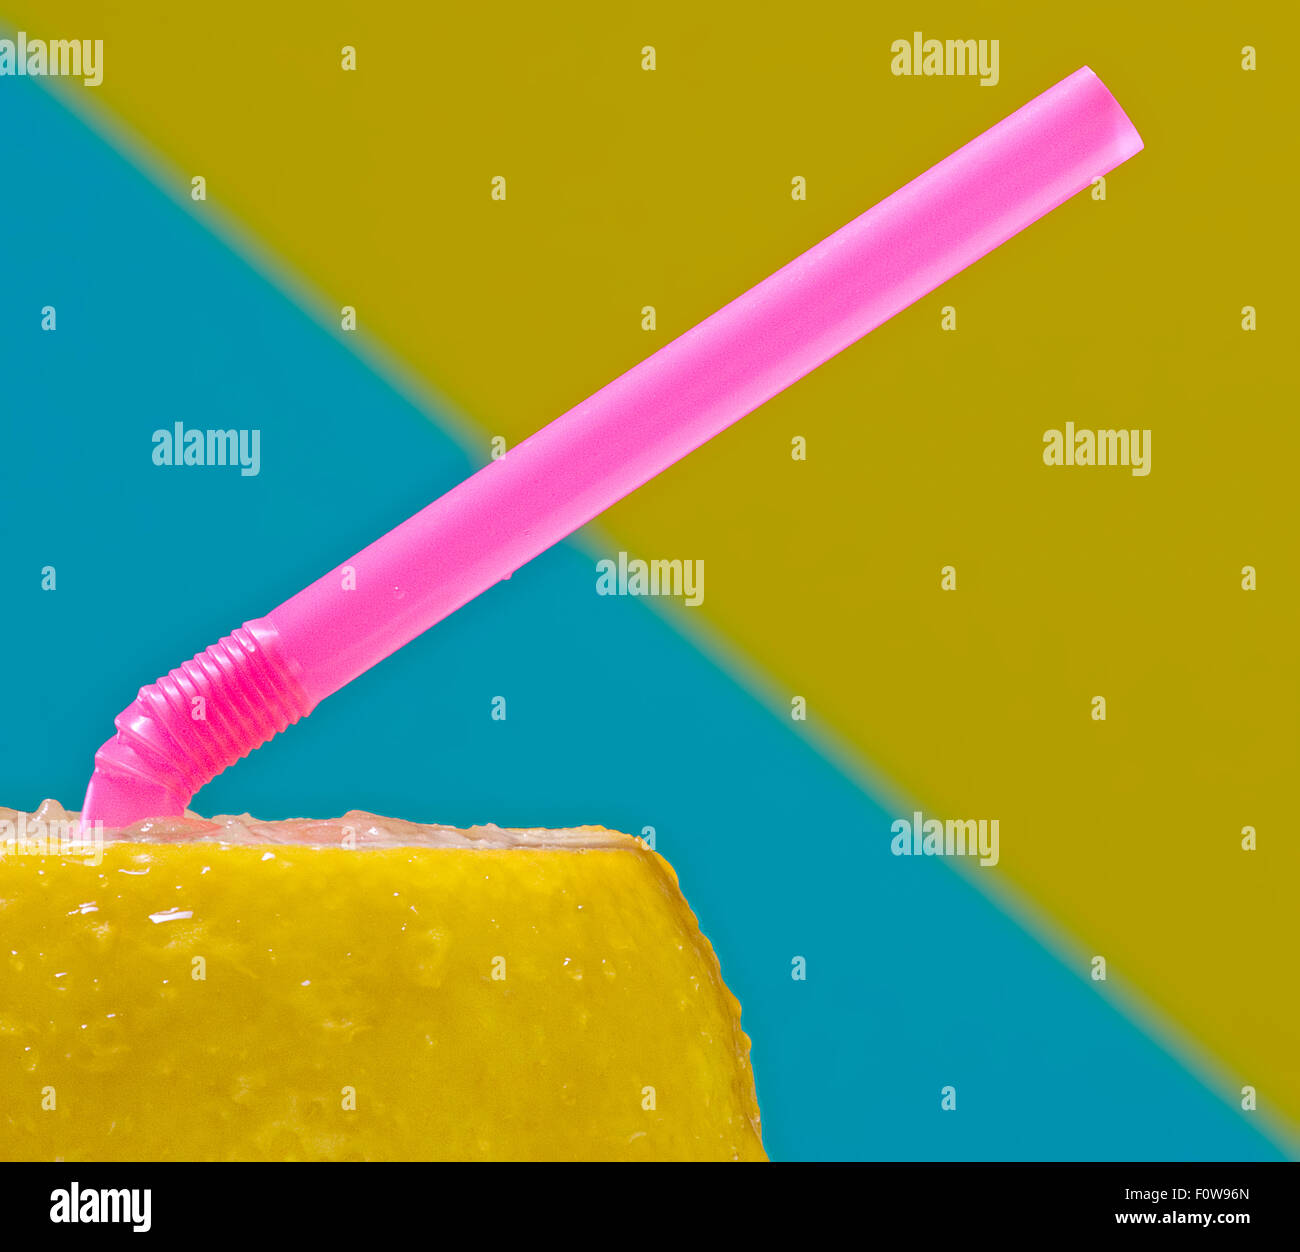 Closeup of a lemon with a pink straw. Stock Photo